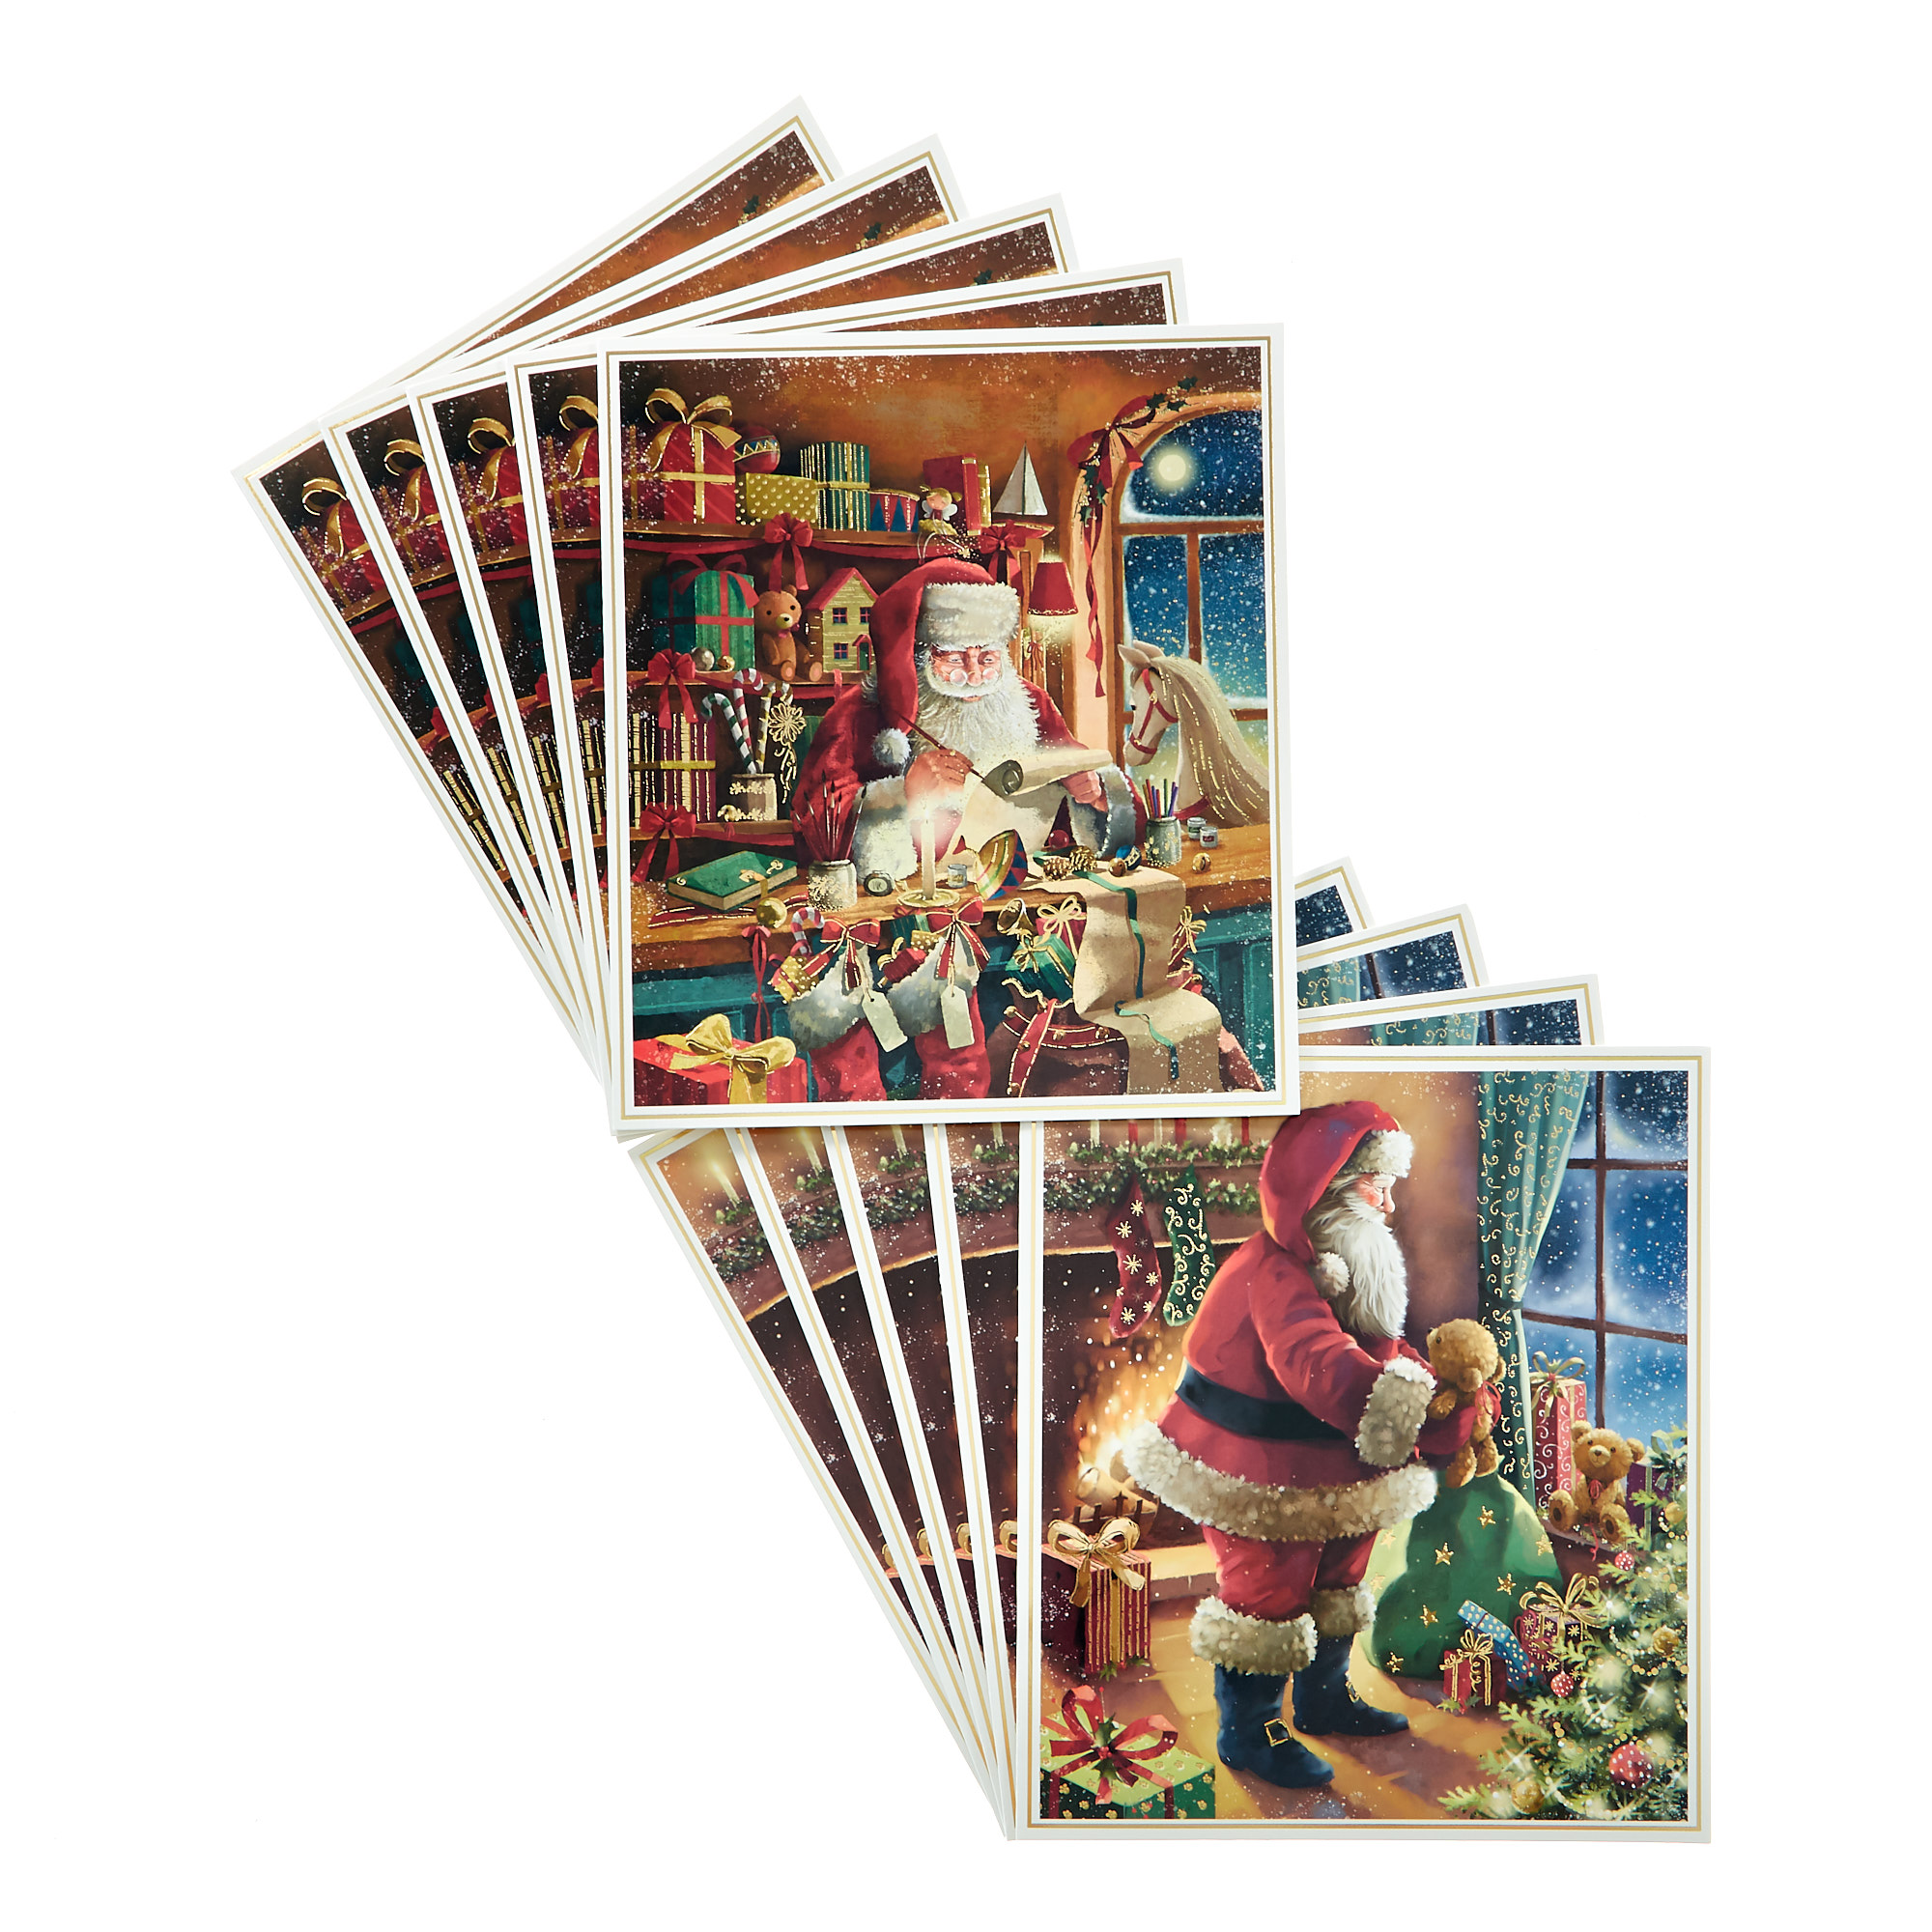 Buy Box of 12 Deluxe Traditional Charity Christmas Cards - 2 Designs for GBP 3.99 | Card Factory UK